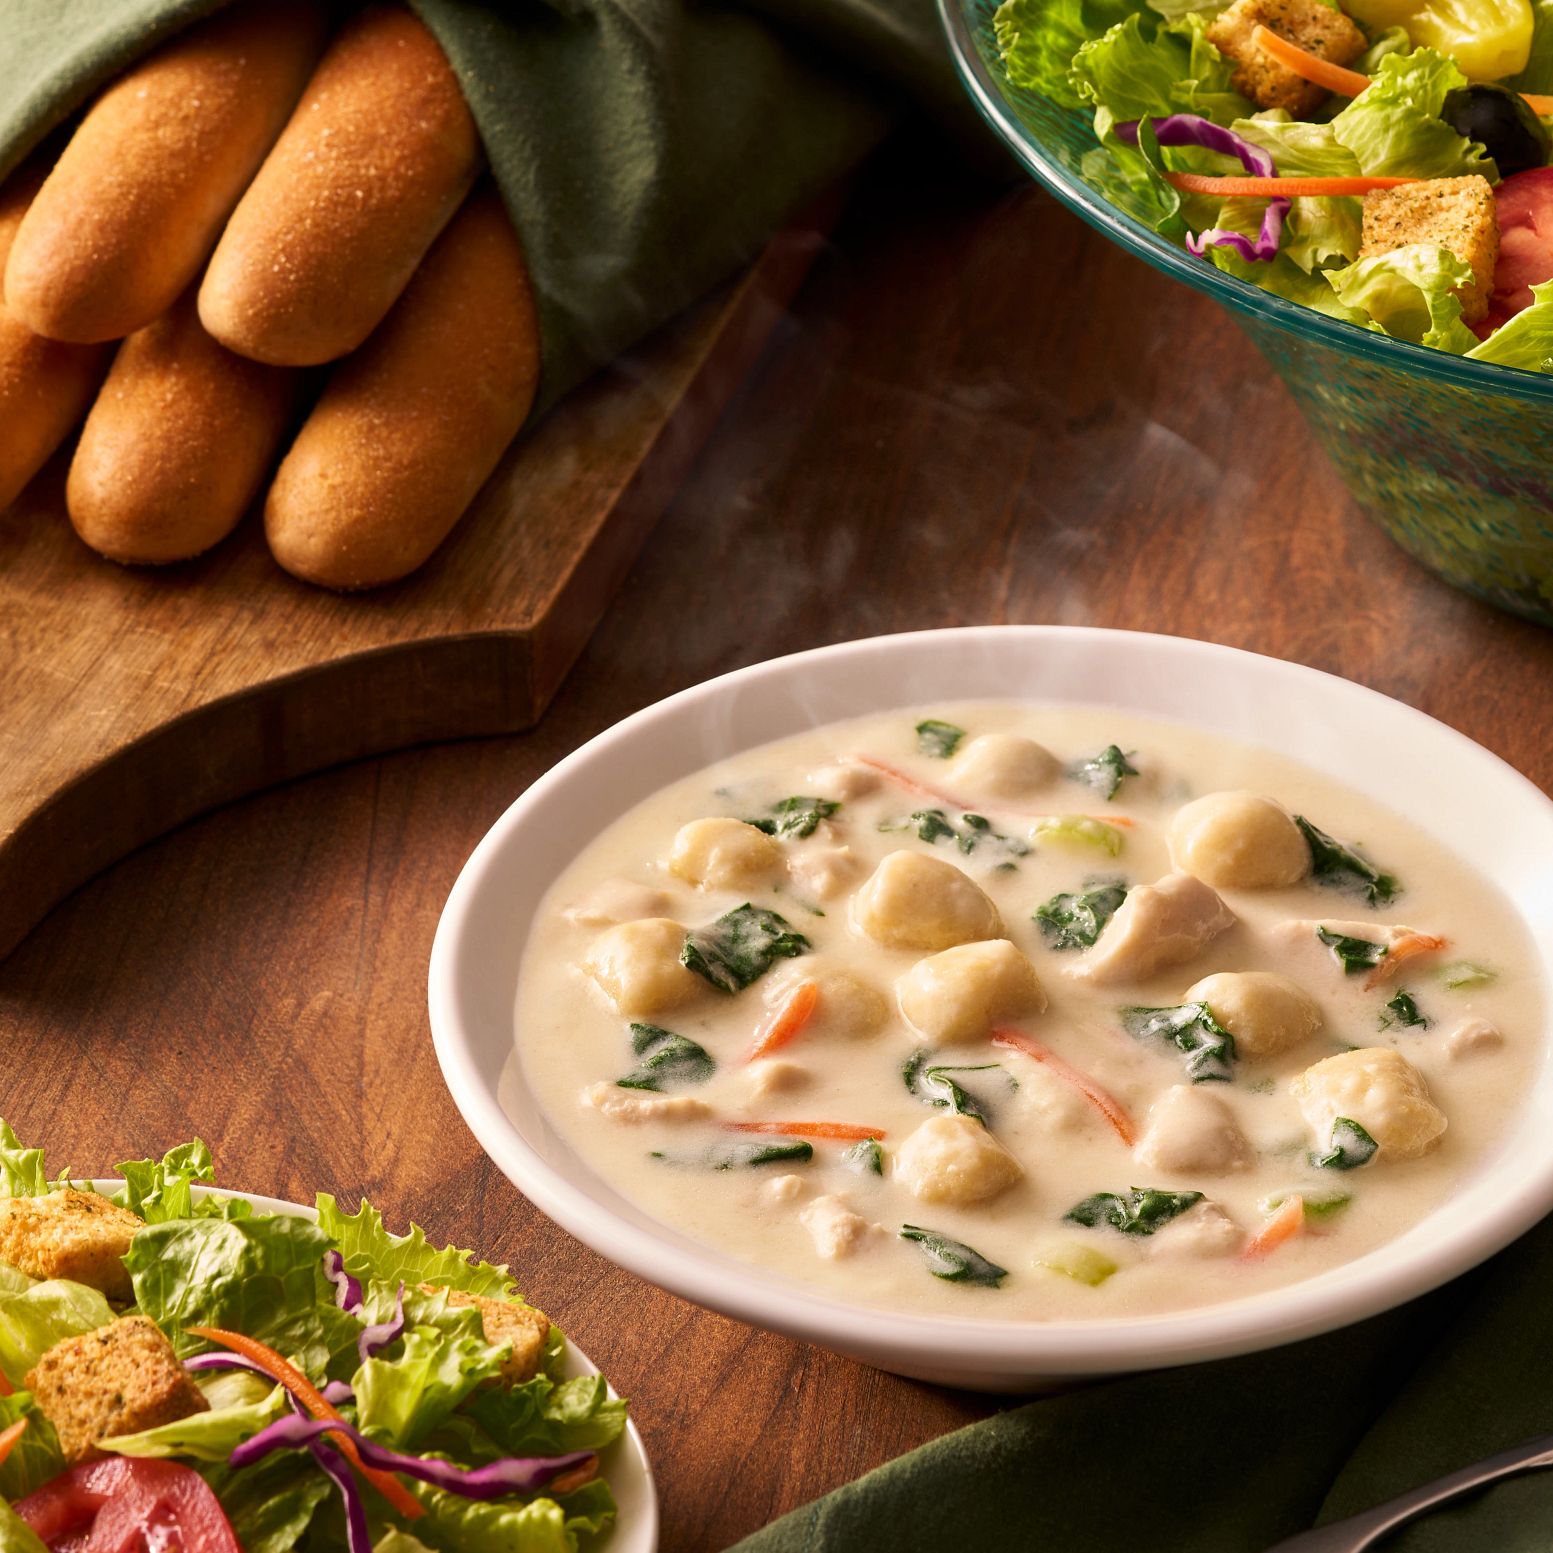 Chicken & Gnocchi: A creamy soup made with roasted chicken, Italian dumplings and spinach. Olive Garden Italian Restaurant San Antonio (210)650-5883